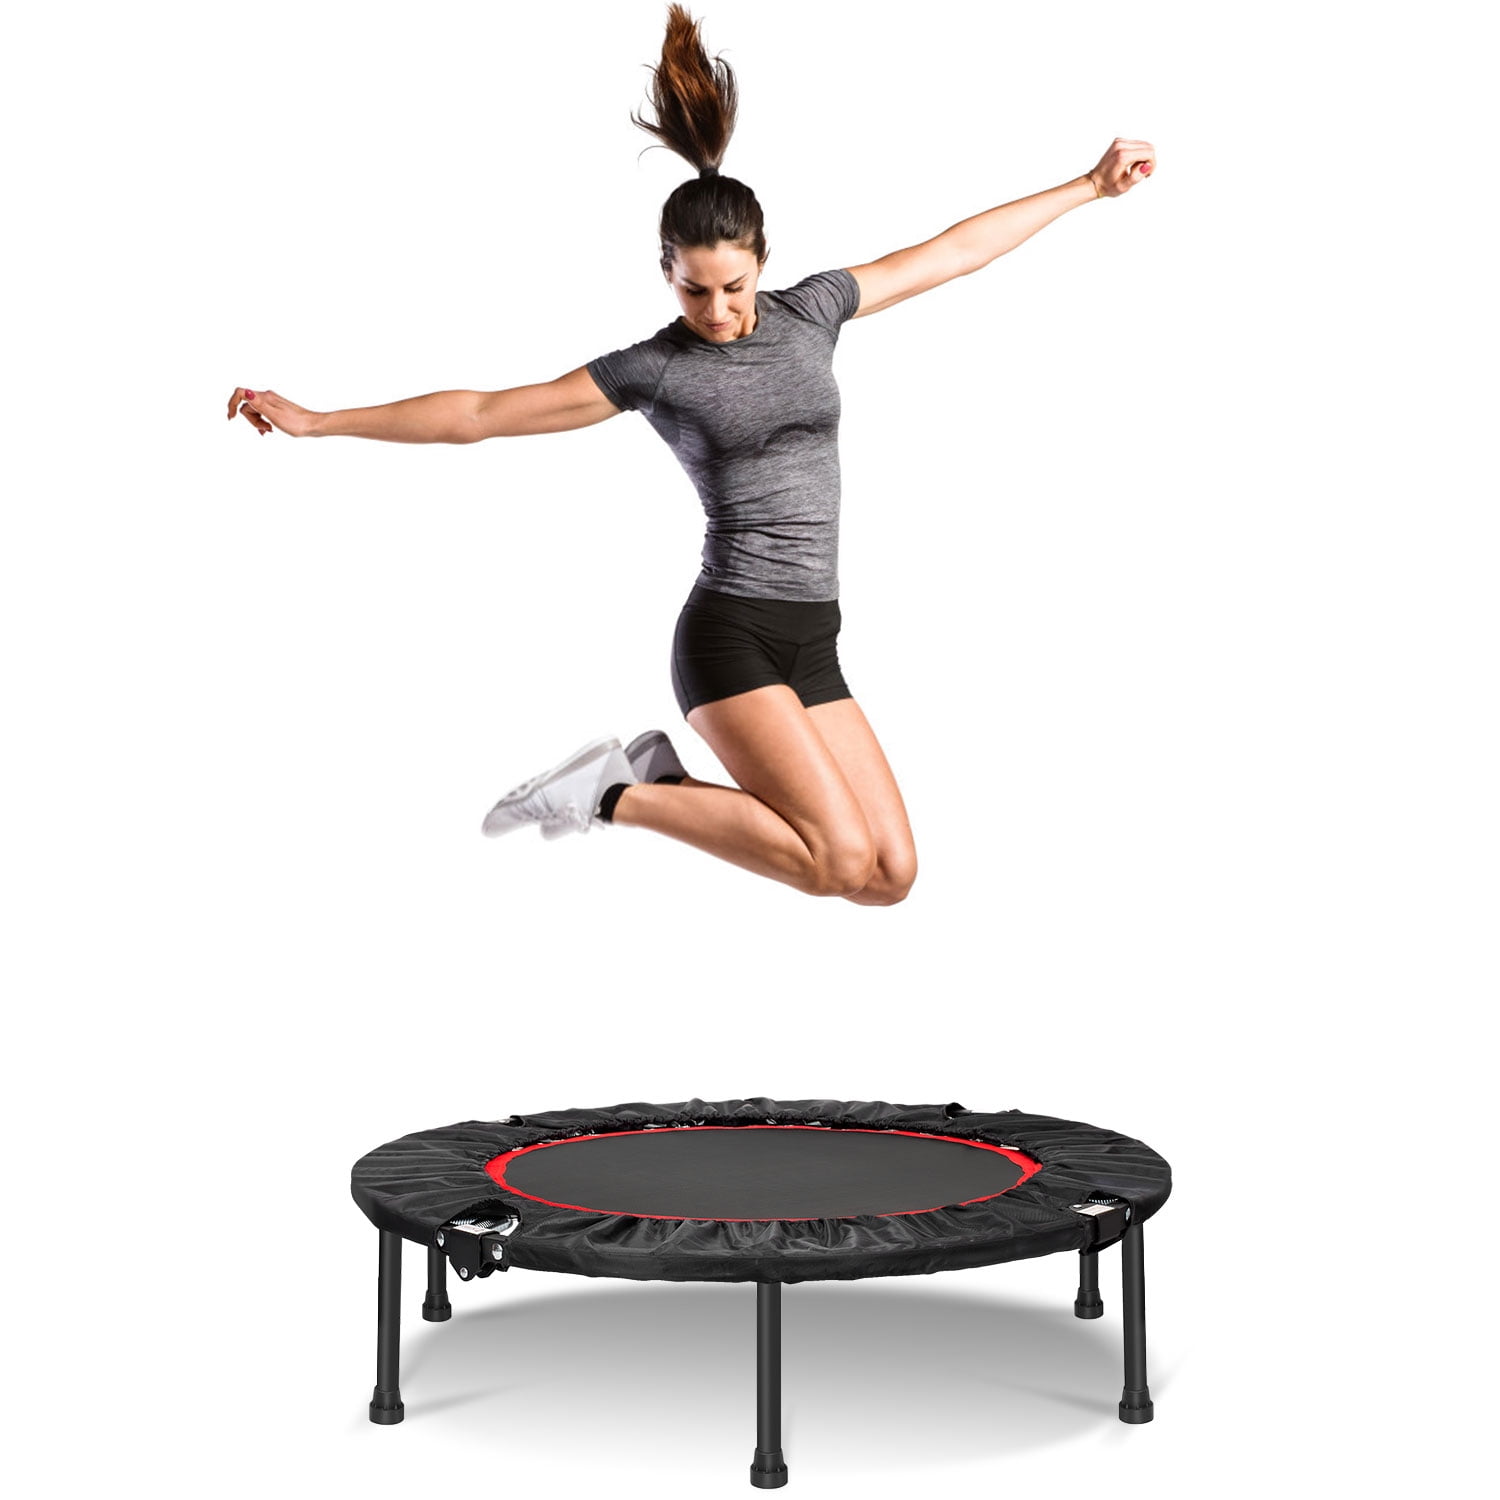 Foldable Trampoline Adjustable 40-Inch Kids Adults Indoor Outdoor Bounce Fitness 